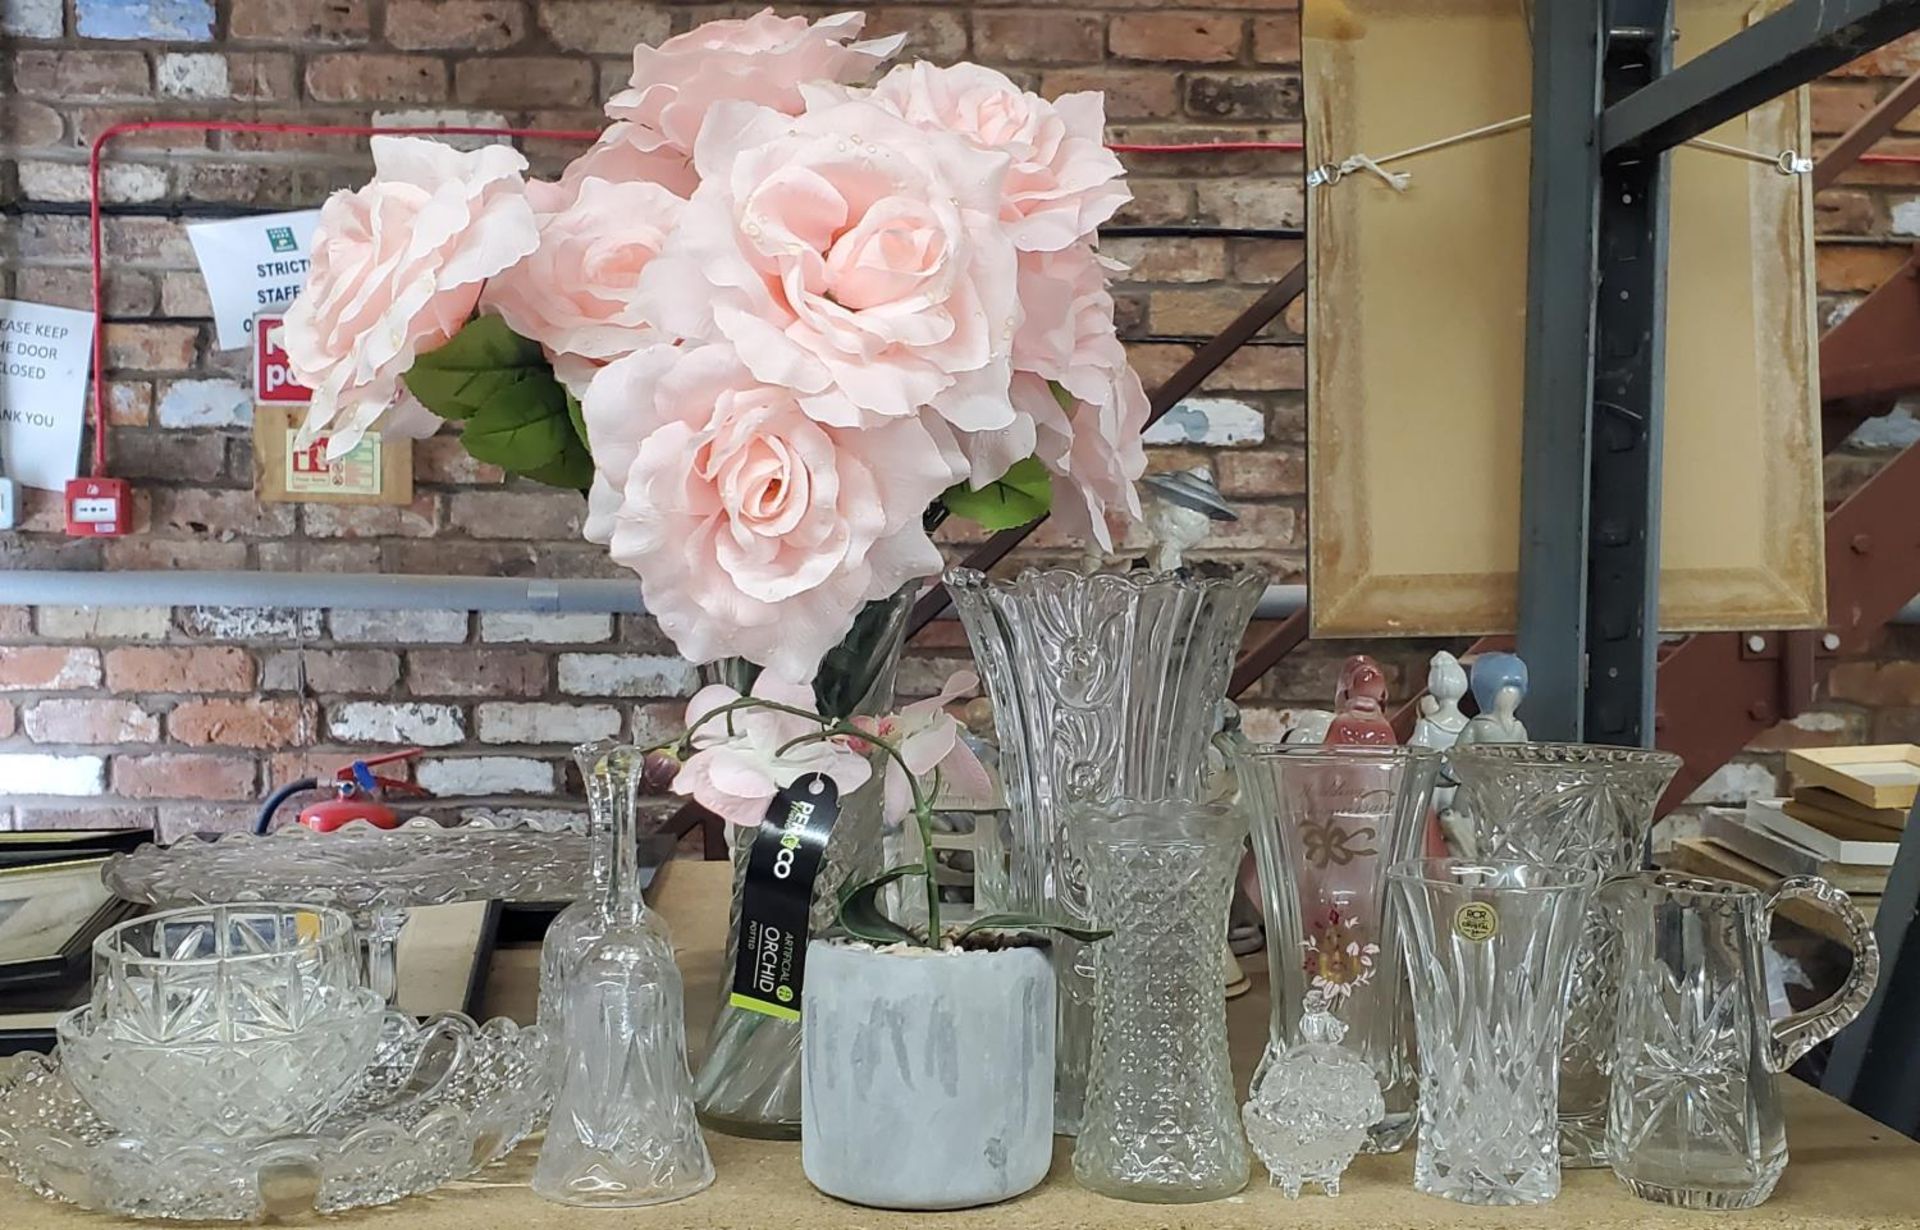 A QUANTITY OF GLASSWARE TO INCLUDE VASES, JUGS, BOWLS, A CAKE STAND, ETC PLUS ARTIFICIAL FLOWERS